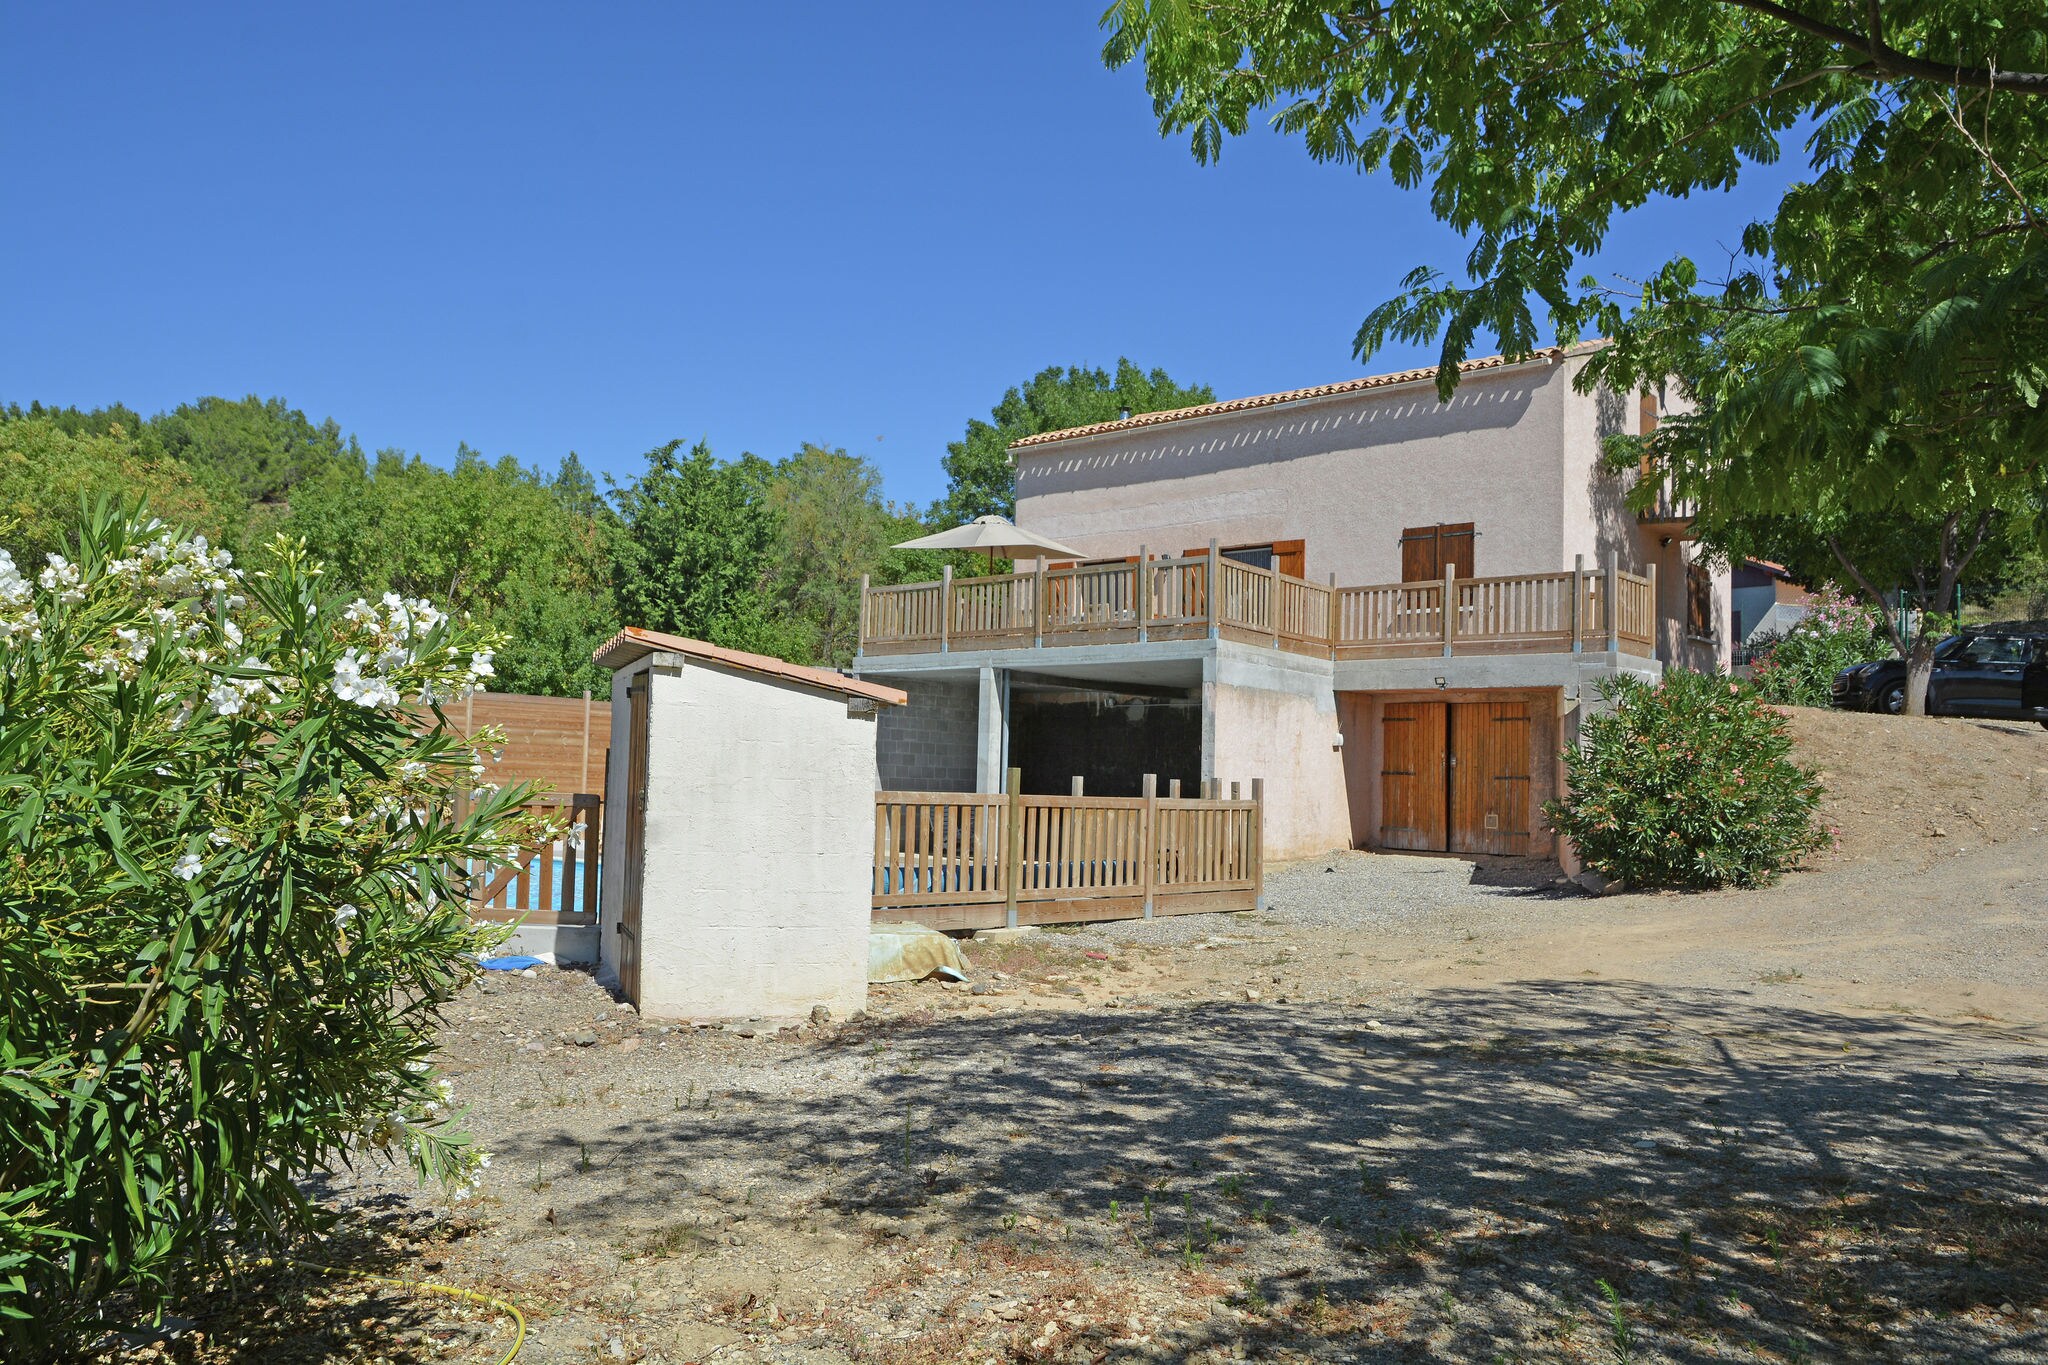 Secluded Villa in Félines with Private Pool, Nice Views & Close to Town Centre